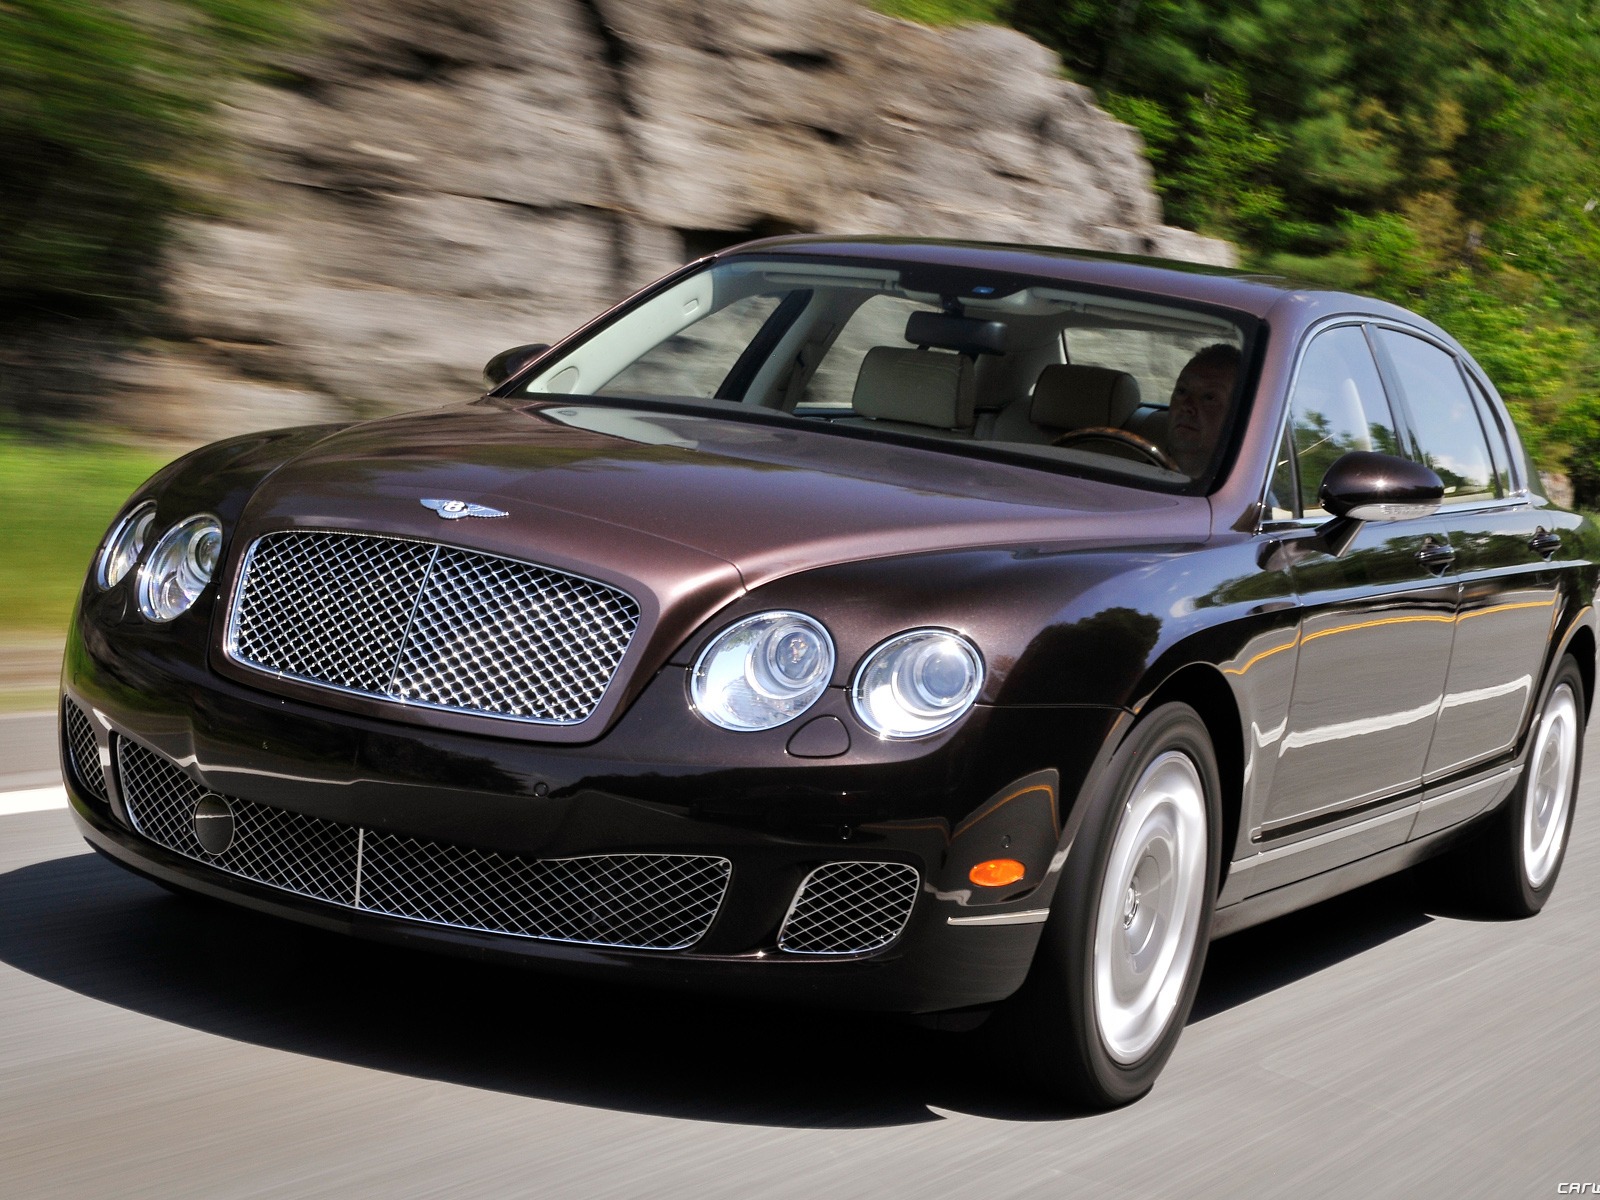 Bentley Continental Flying Spur - 2008 賓利 #16 - 1600x1200